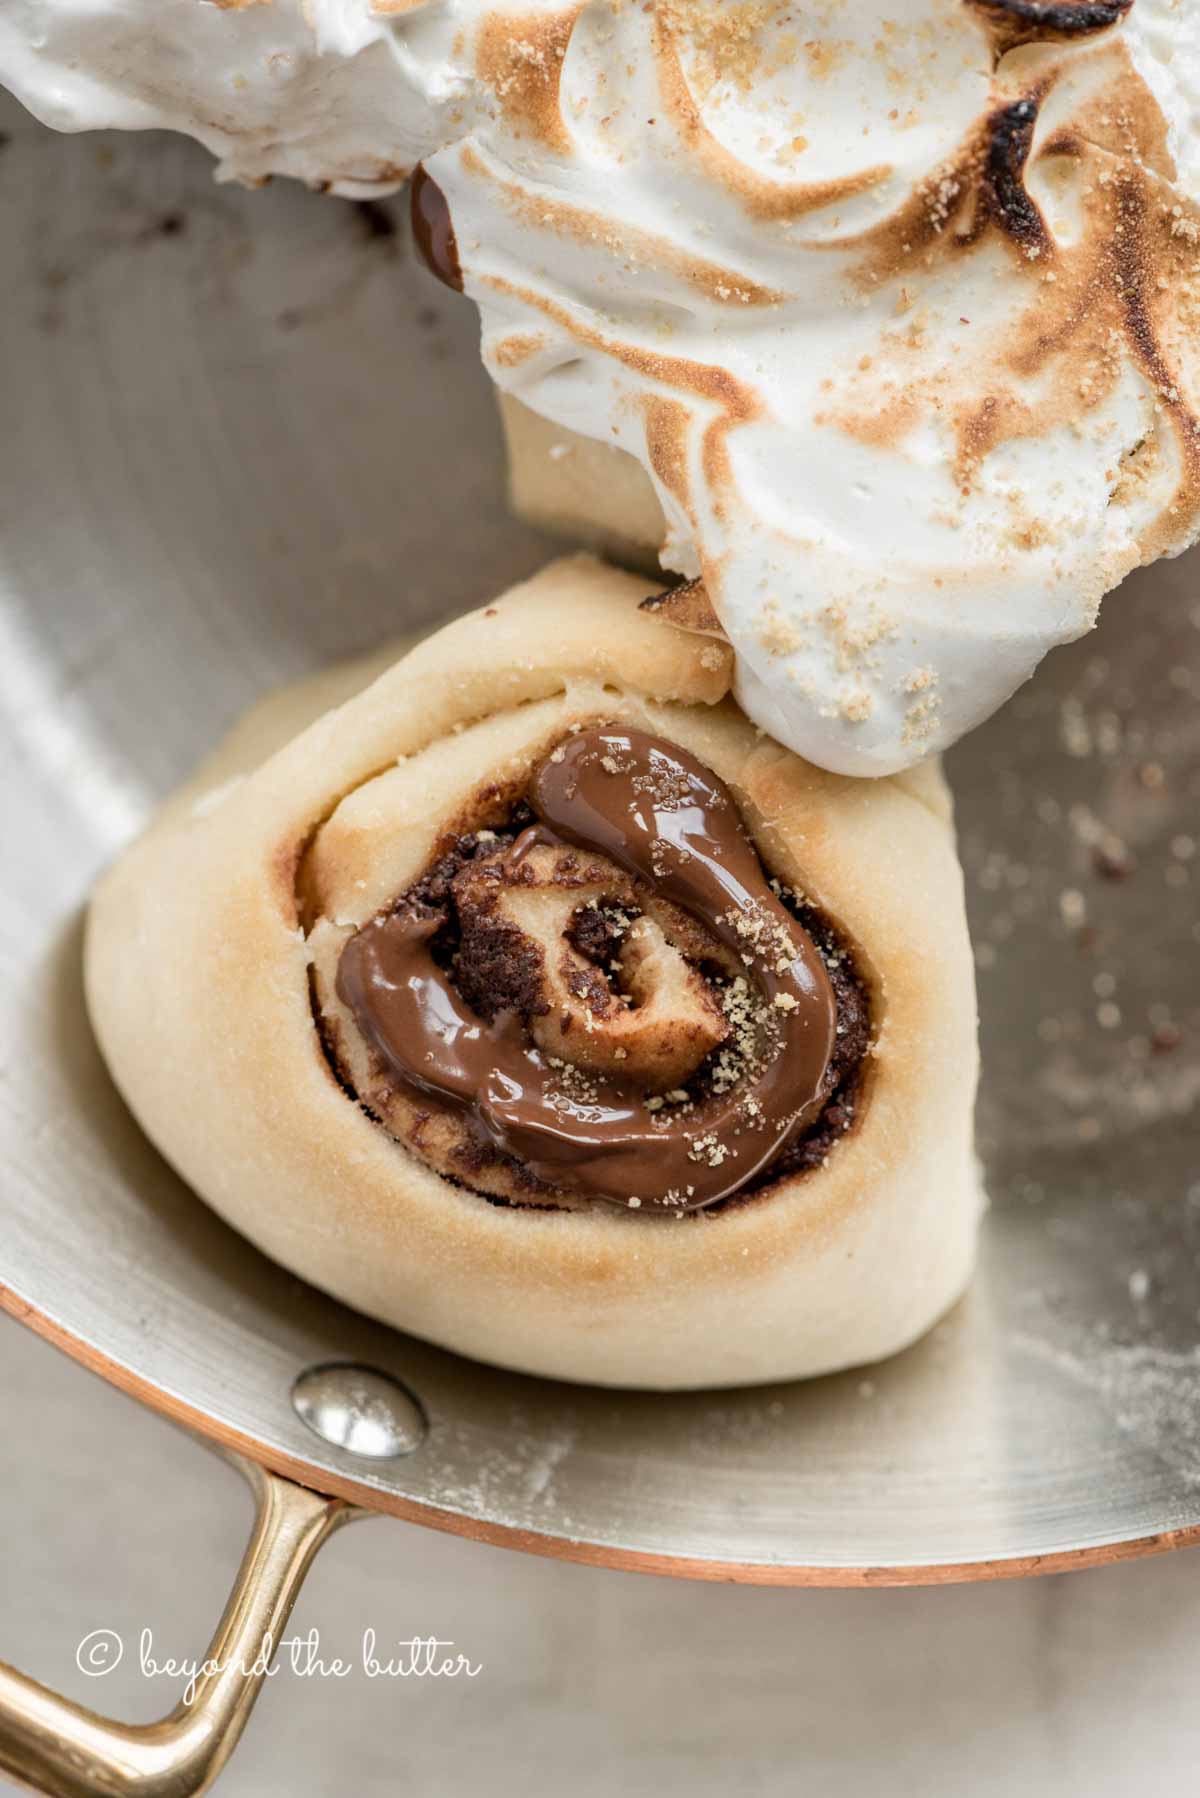 Overhead closeup image of s'mores rolls partially covered with marshmallow topping | All Images © Beyond the Butter™